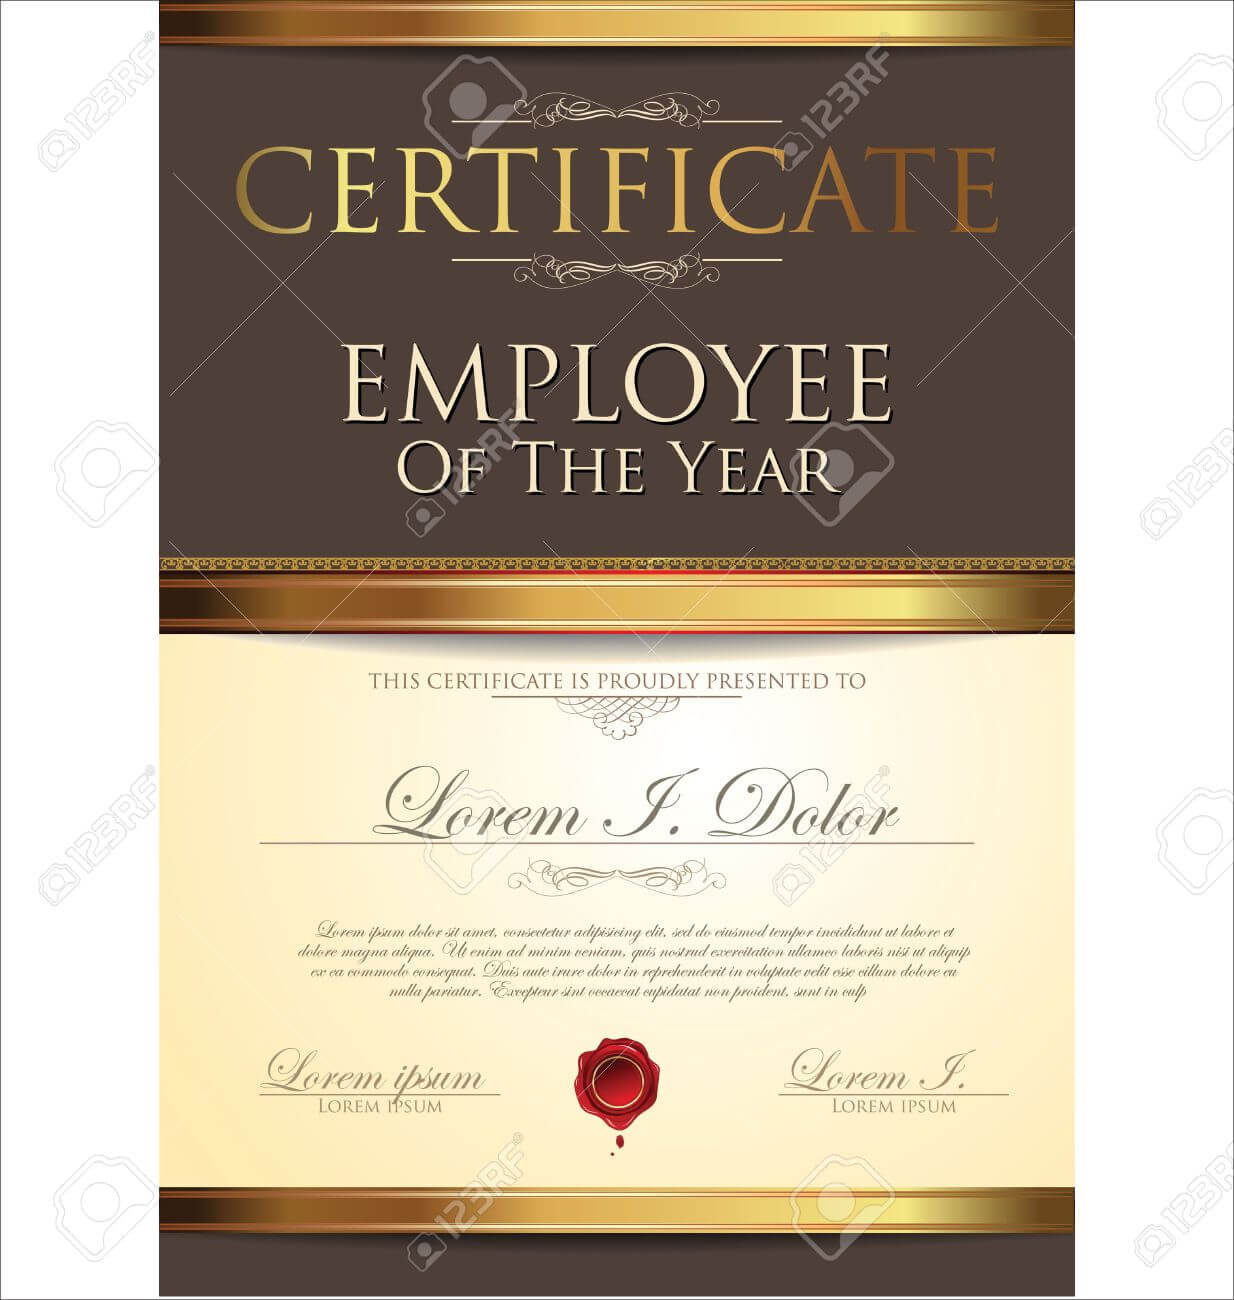 Certificate Template, Employee Of The Year Throughout Employee Of The Year Certificate Template Free